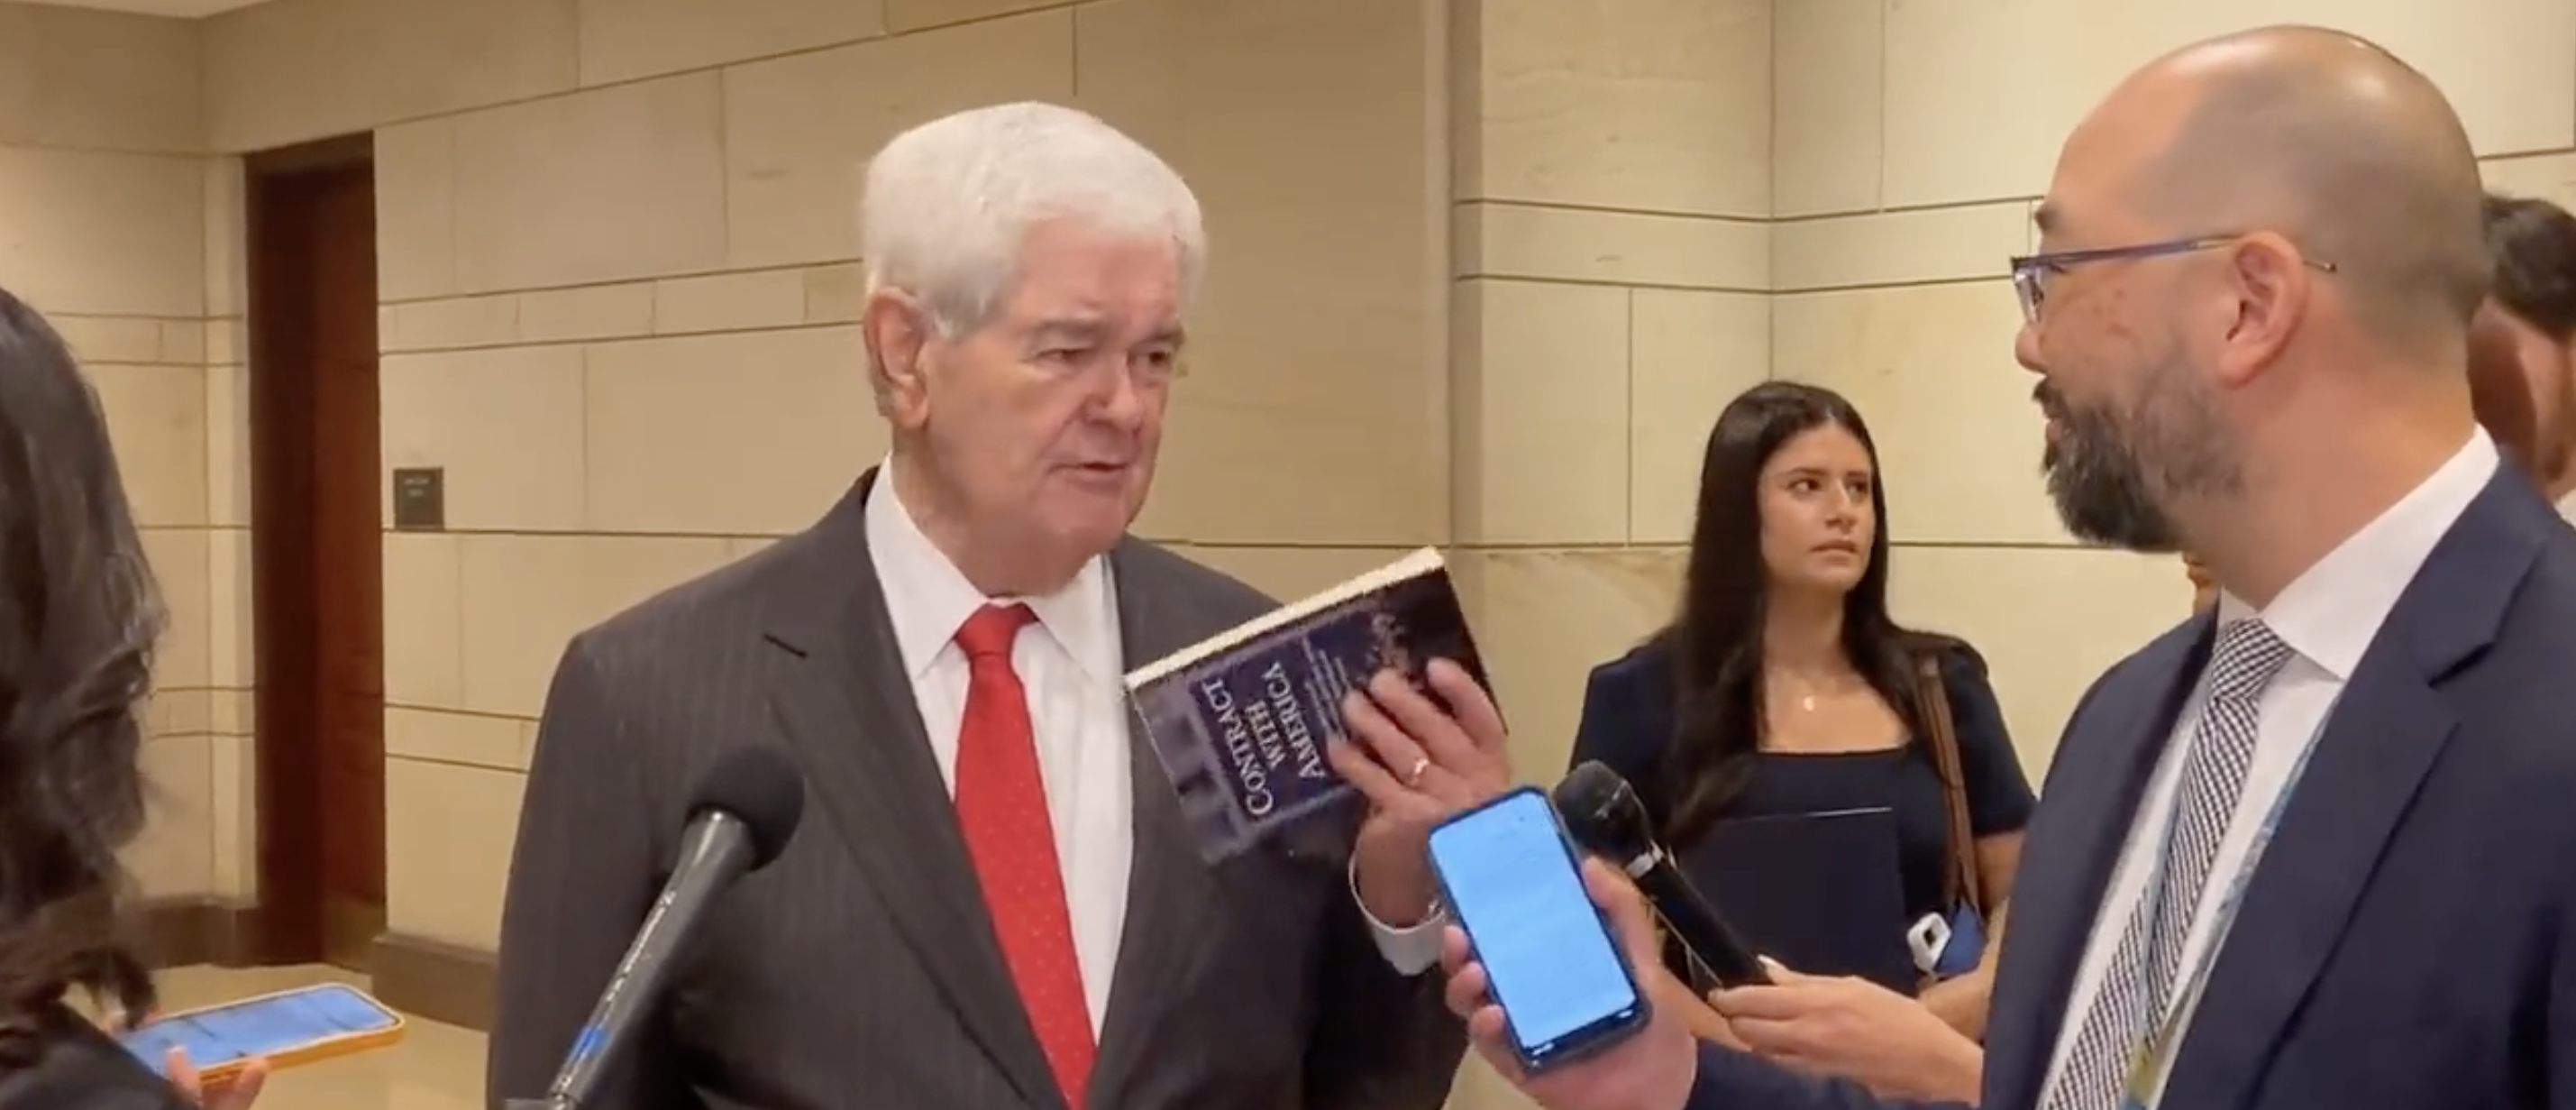 ‘You Have A Learning Disability’: Gingrich Mocks NBC Reporter At Point Blank